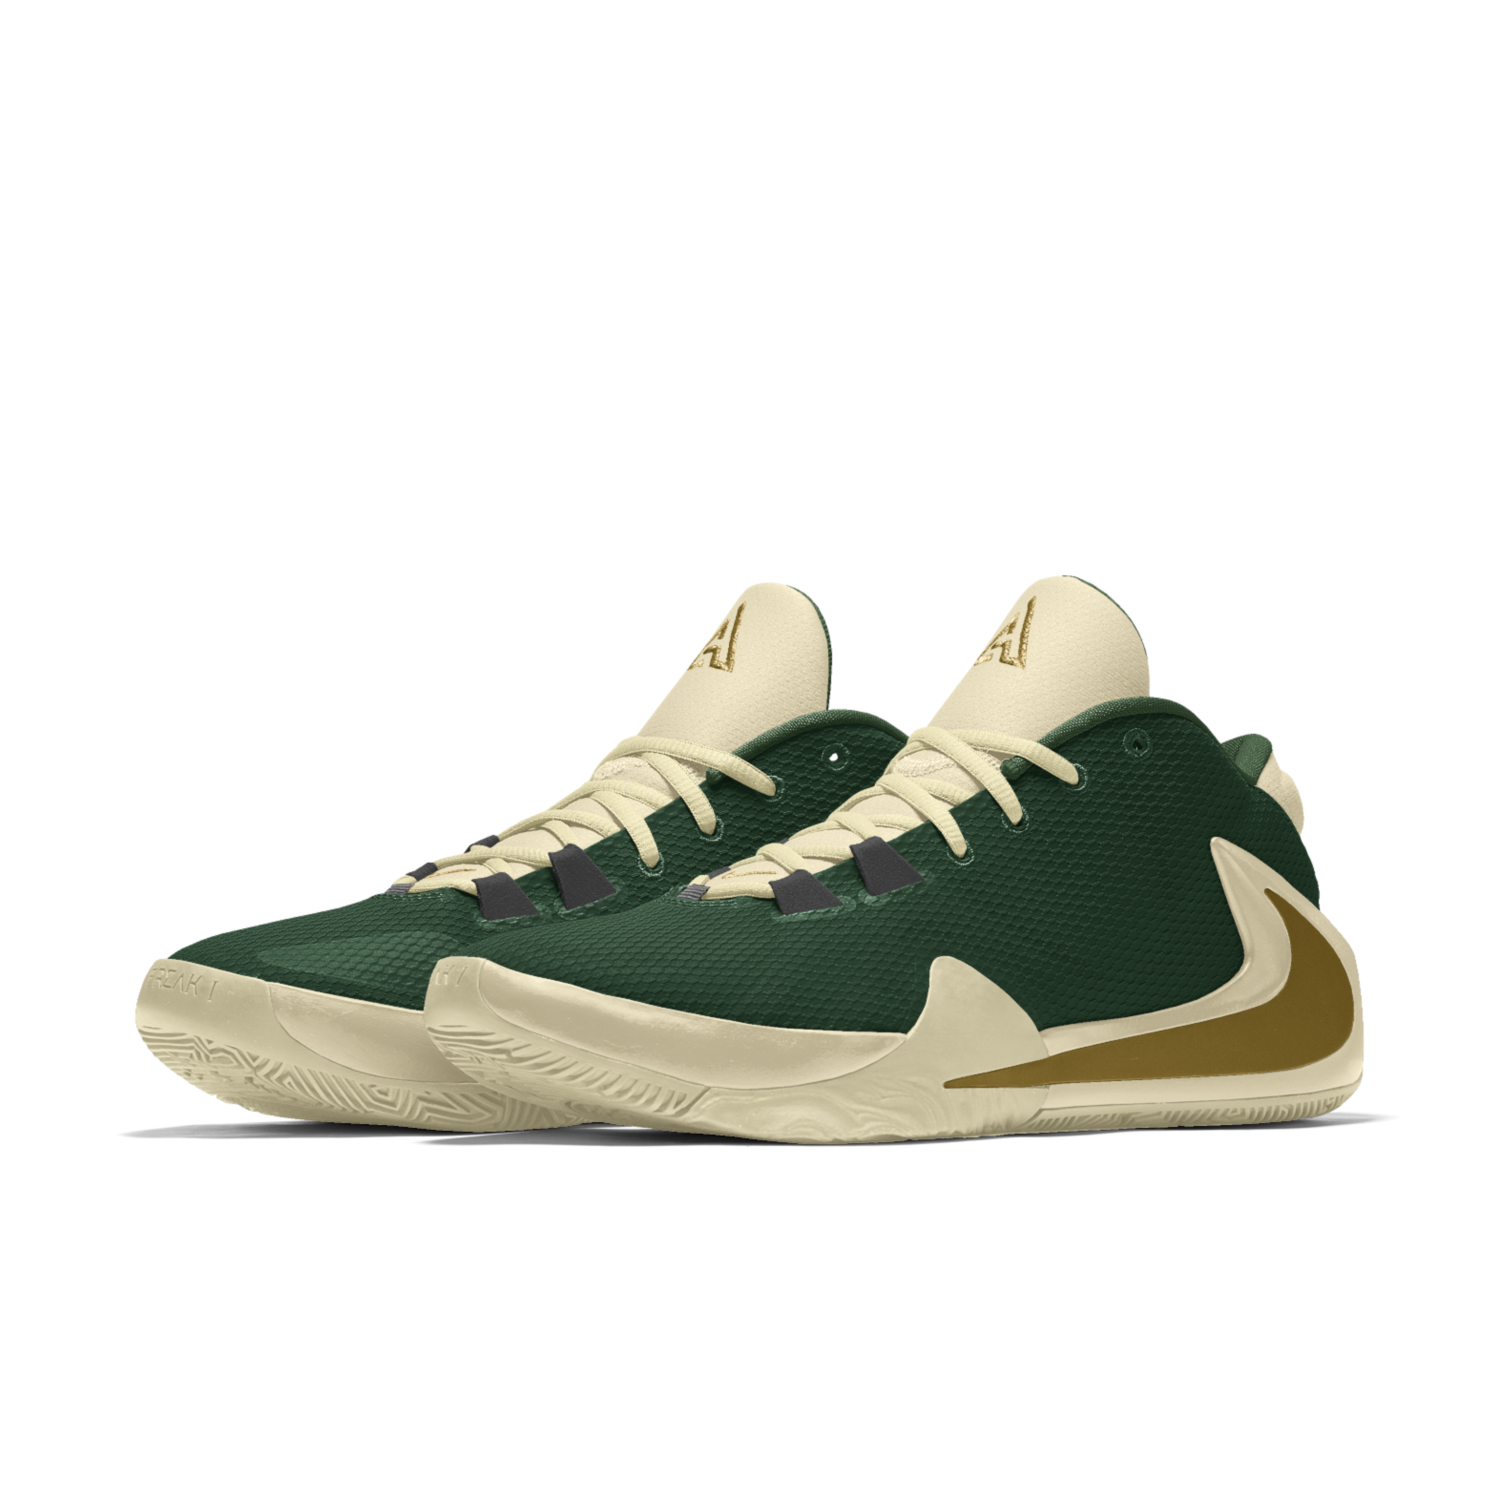 Giannis' Nike Zoom Freak 1 Is Now Customizable With &quot;Nike By You&quot;